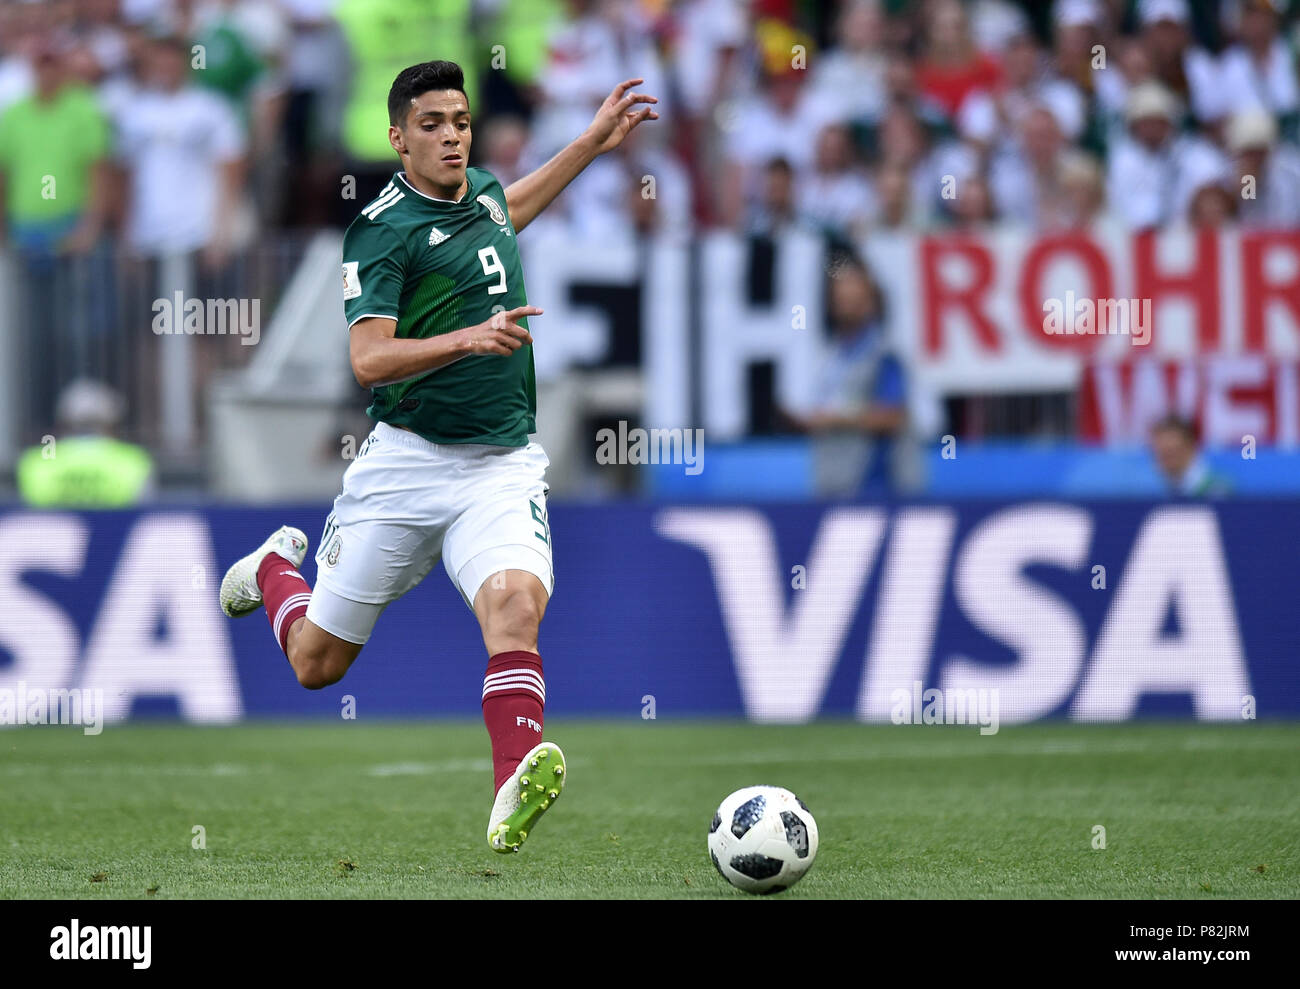 MOSCOW, RUSSIA - JUNE 17: Raul Jimenez of Mexico in action during the 2018 FIFA World Cup Russia group F match between Germany and Mexico at Luzhniki Stadium on June 17, 2018 in Moscow, Russia. (Photo by Lukasz Laskowski/PressFocus/MB Media) Stock Photo